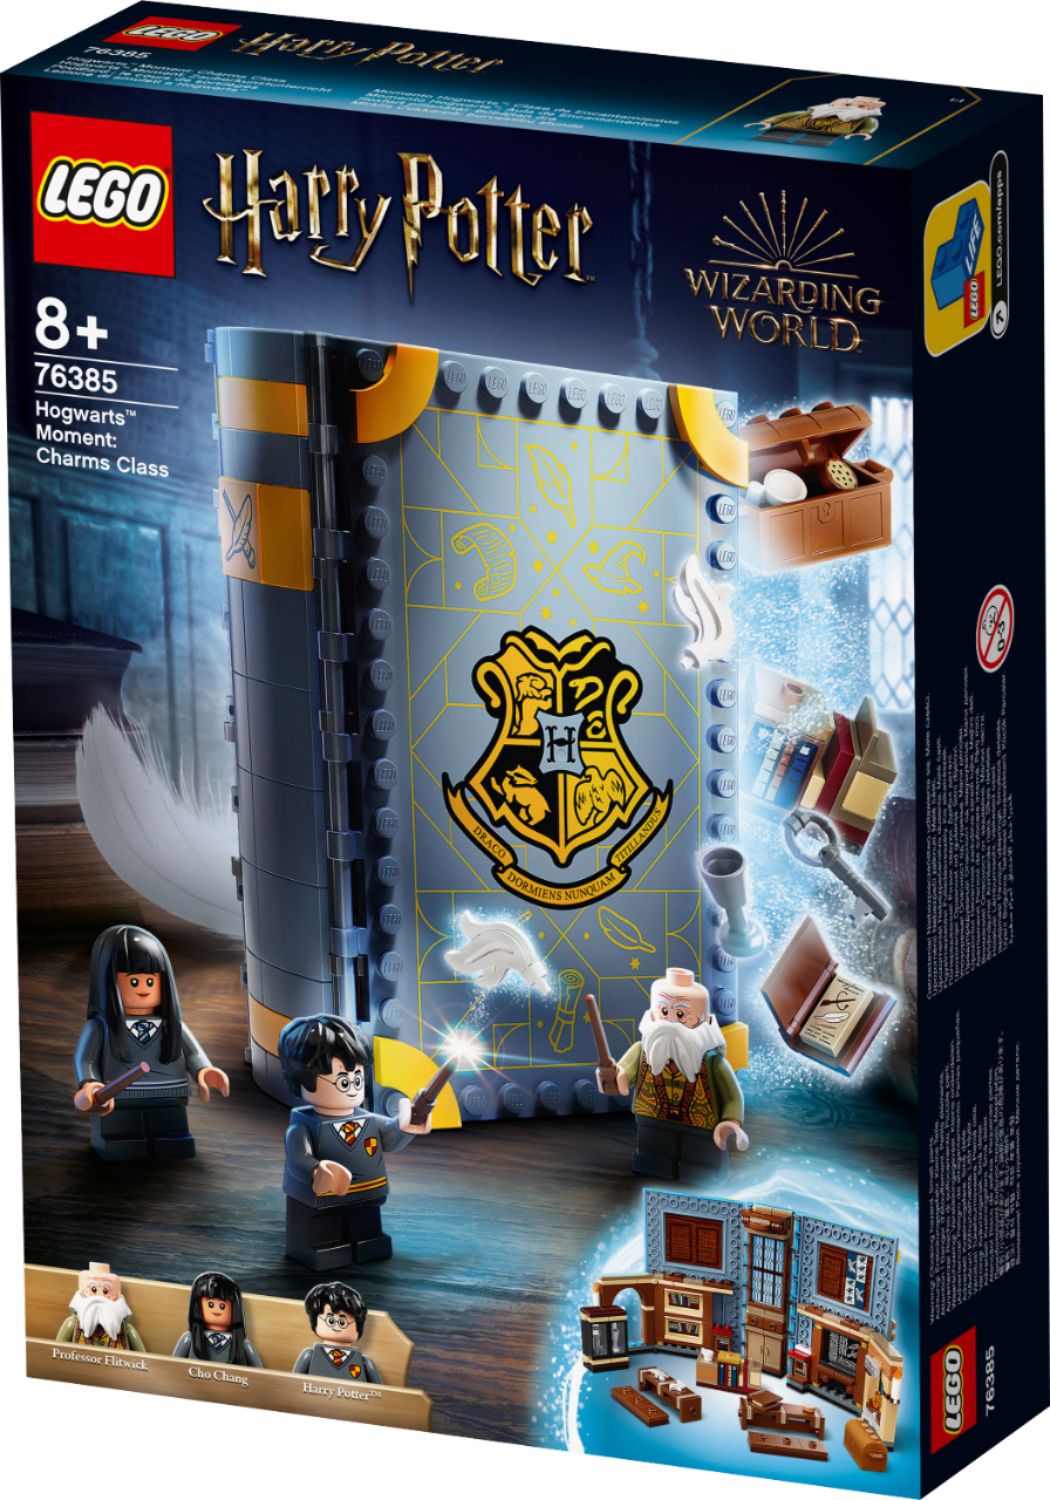 Angle View: LEGO - Harry Potter Hogwarts Moment: Charms Class 76385